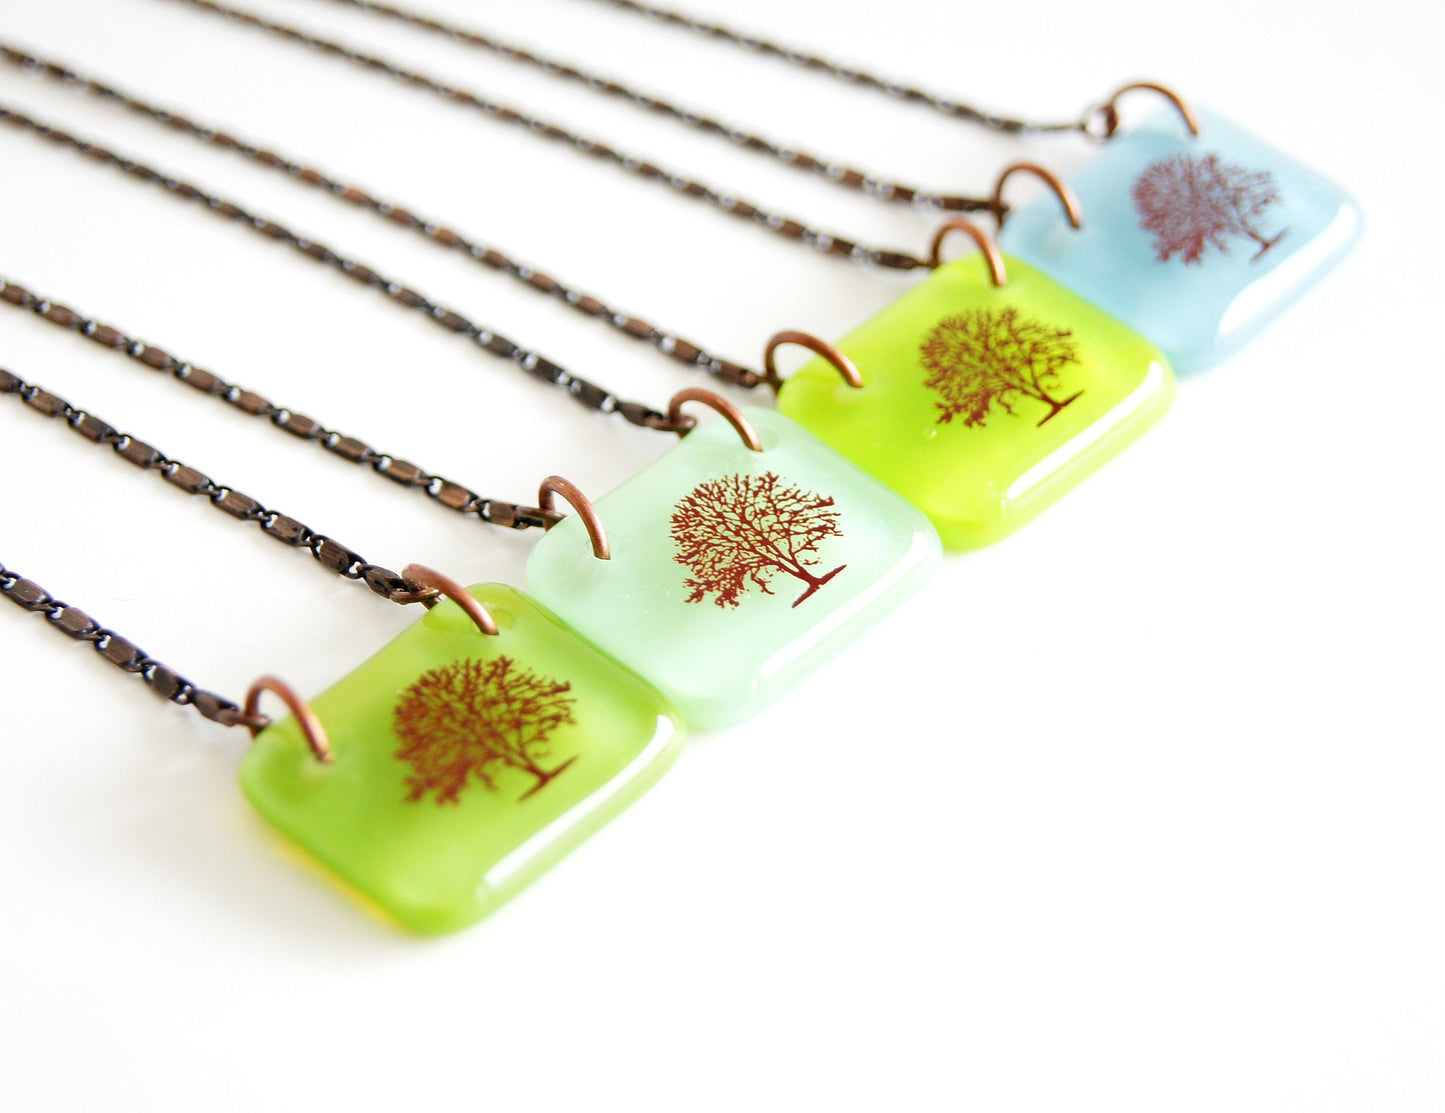 Blue kiln-fired glass pendant handcrafted with large orchard tree illustration 